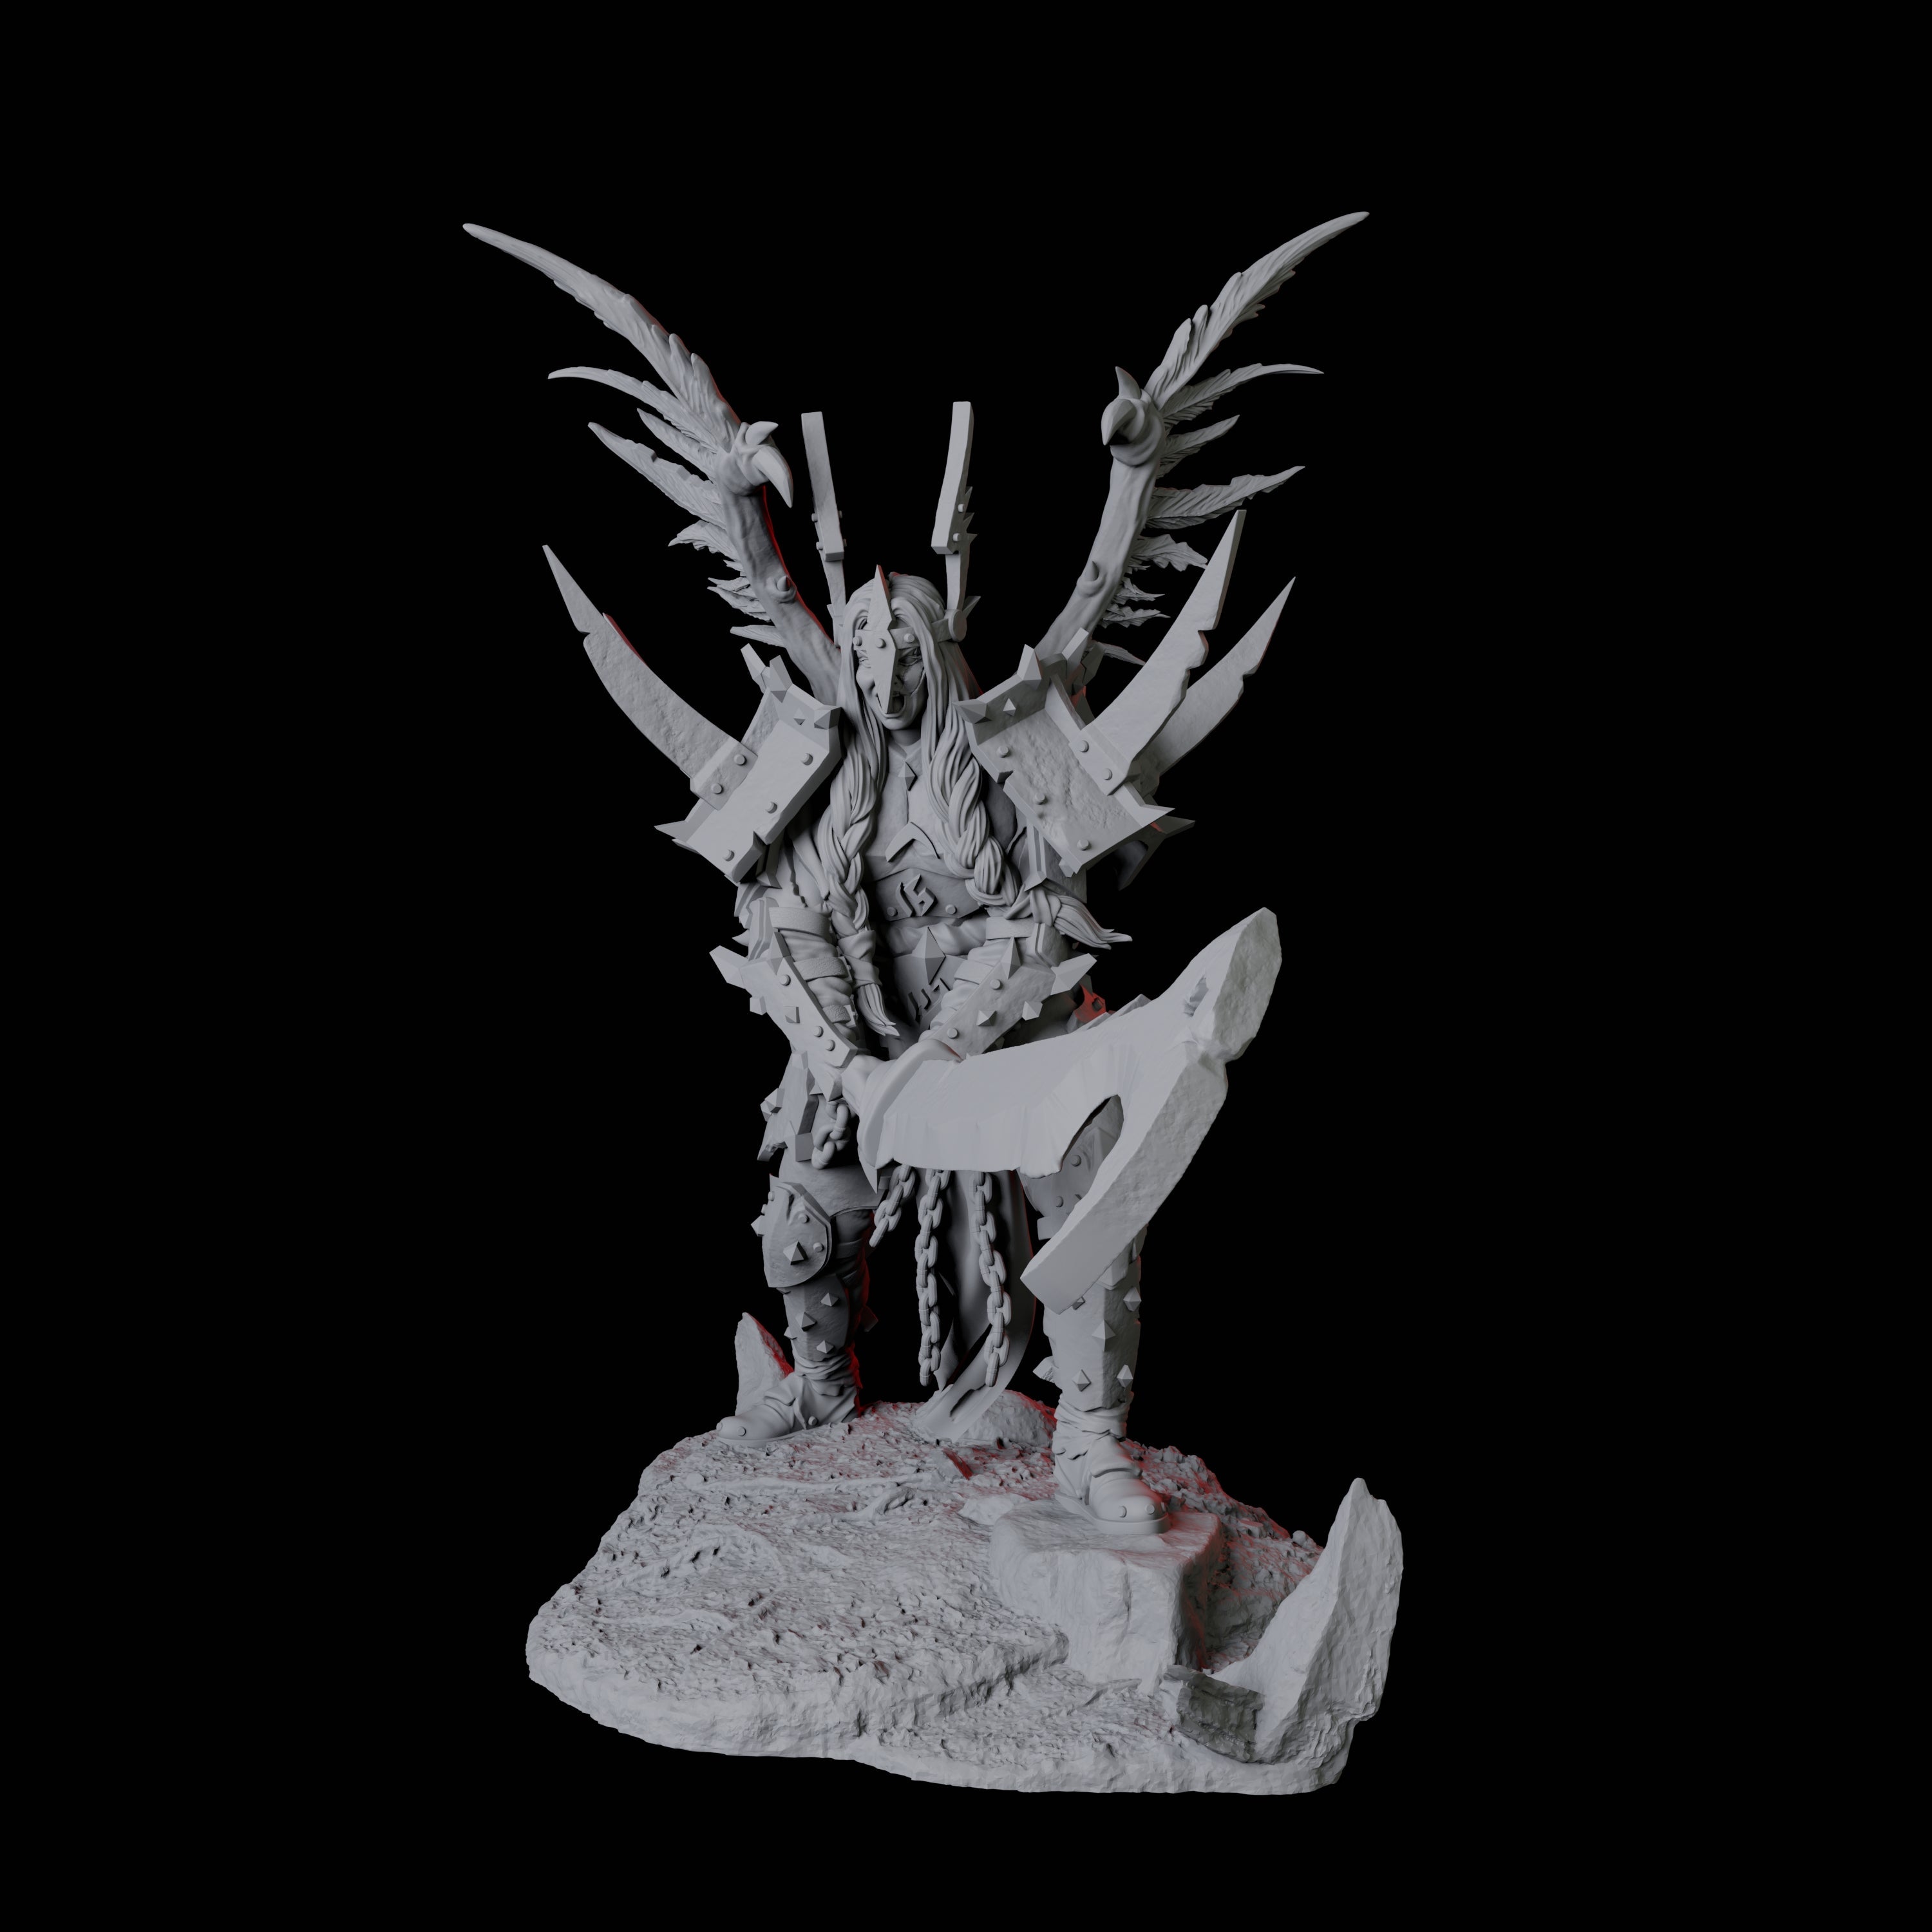 Raging Barbarian Champion Miniature for Dungeons and Dragons, Pathfinder or other TTRPGs